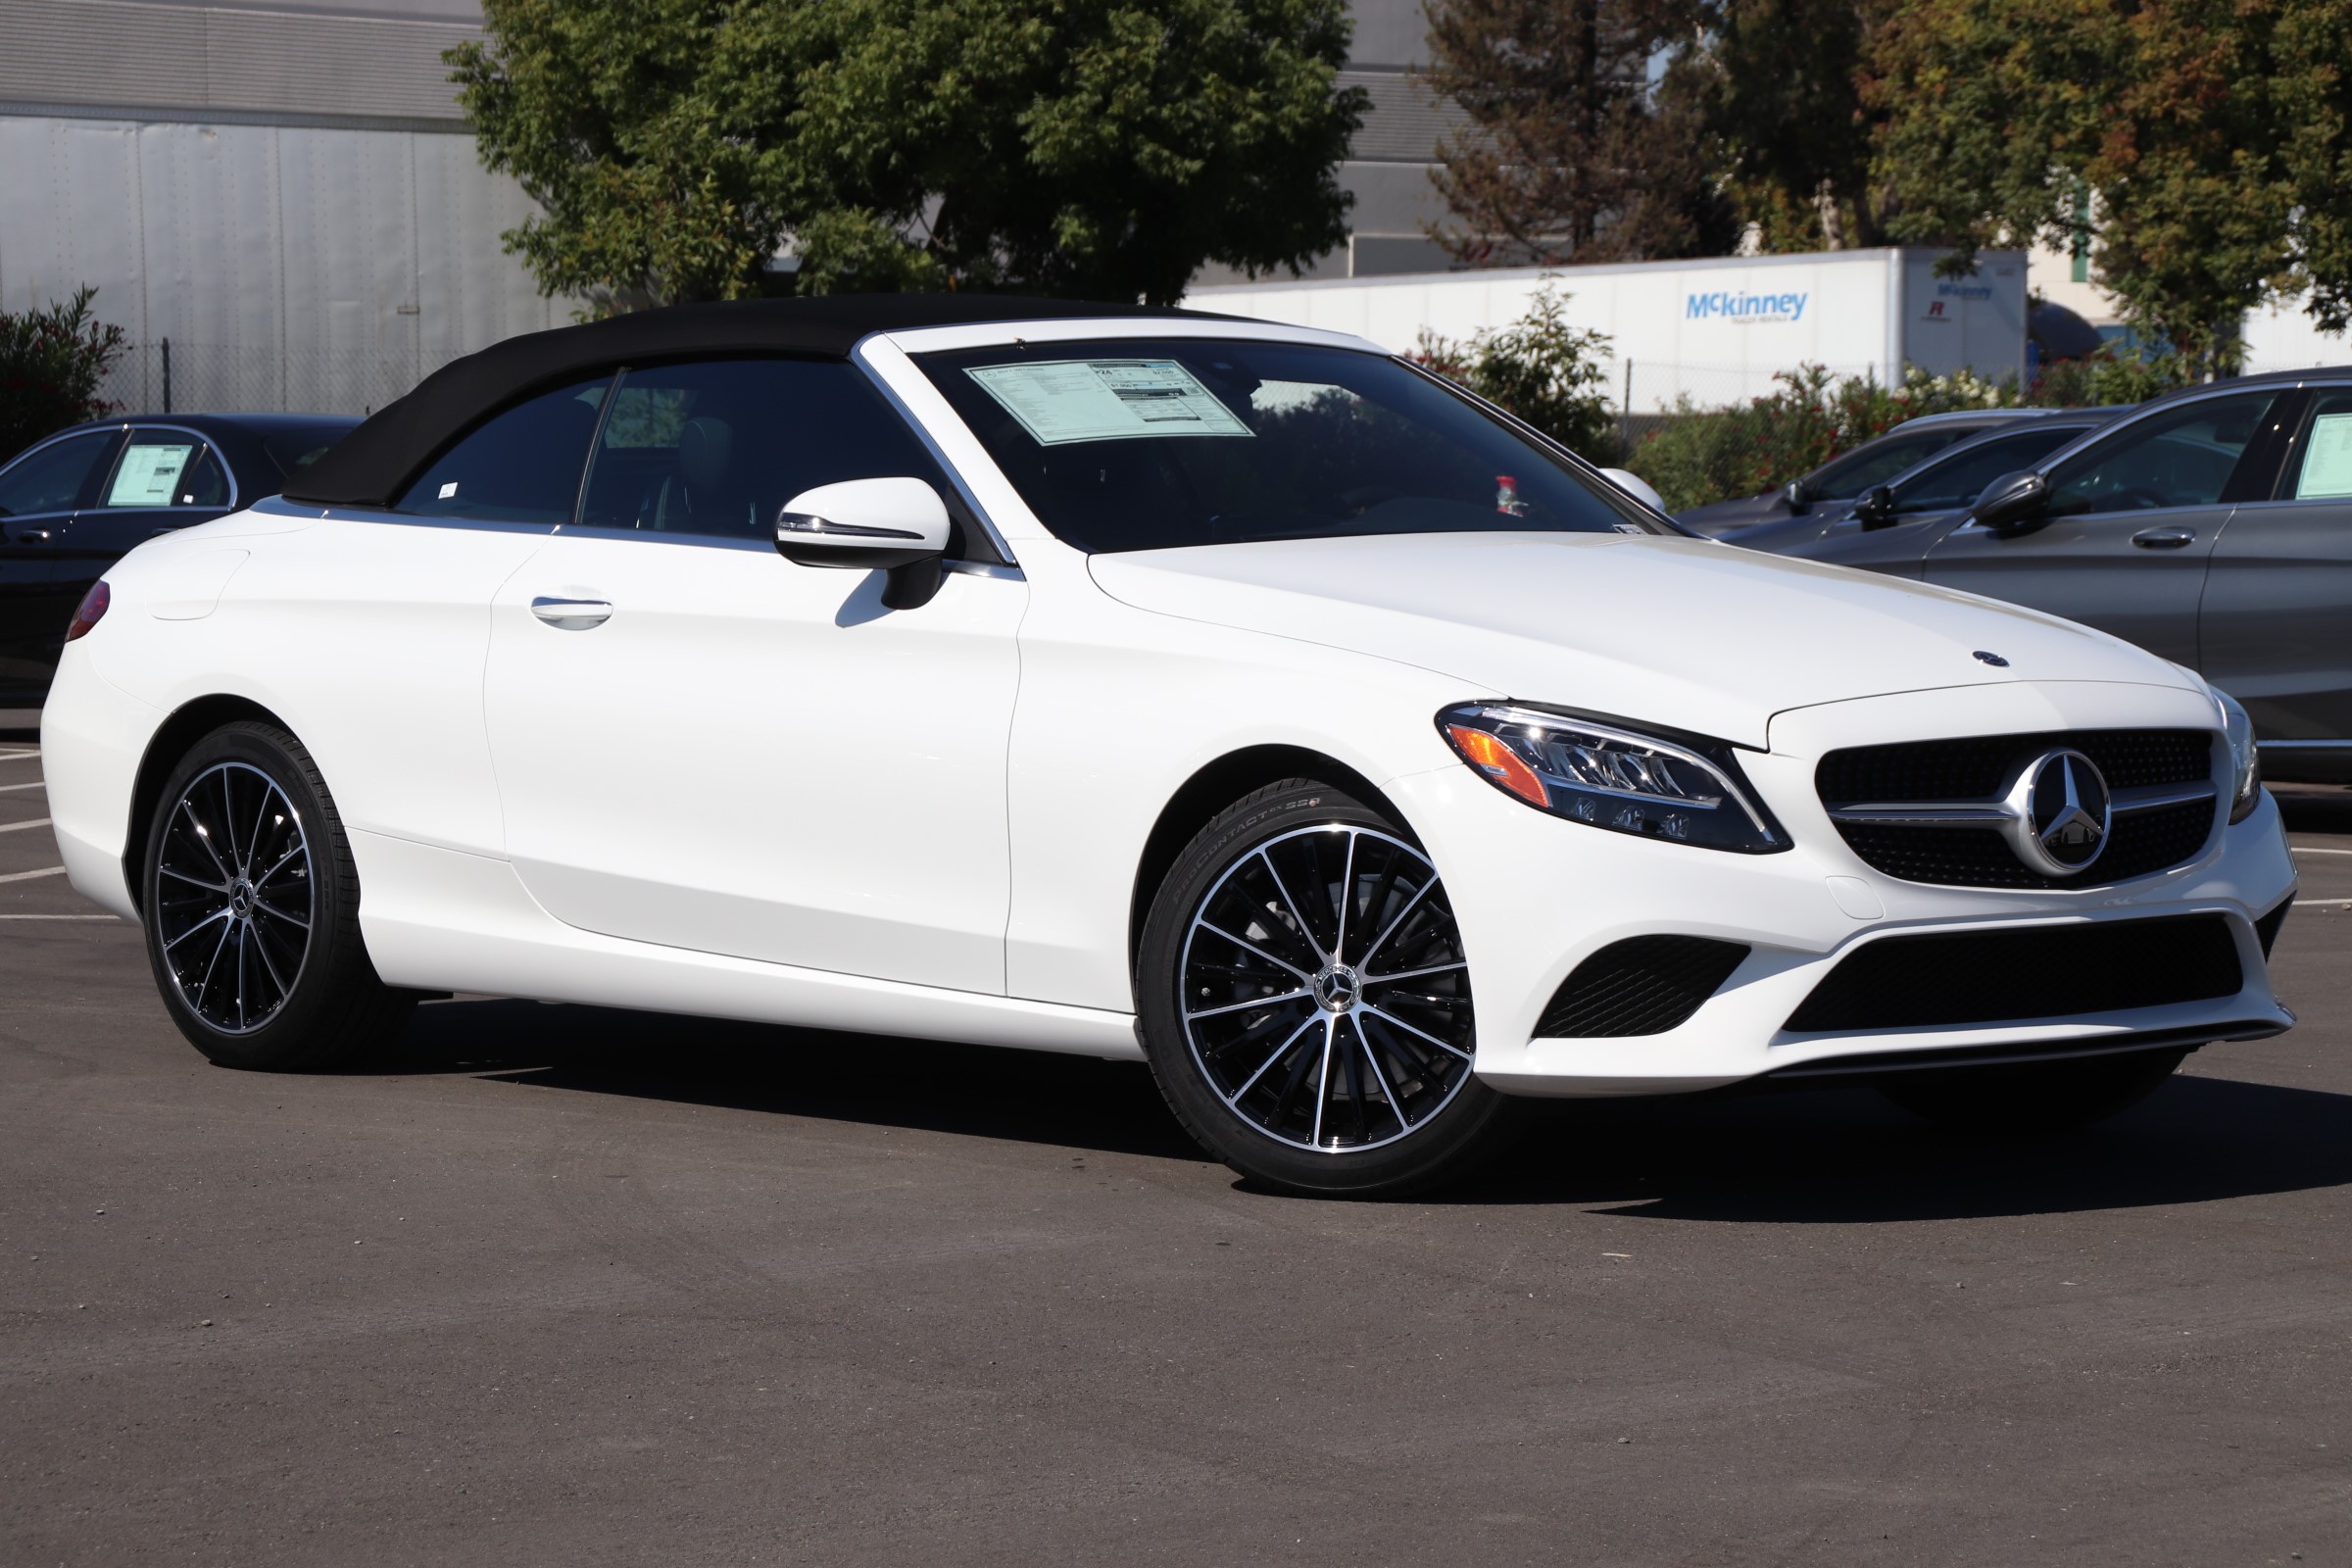 New 2019 MercedesBenz CClass C 300 Cabriolet Convertible in Fremont